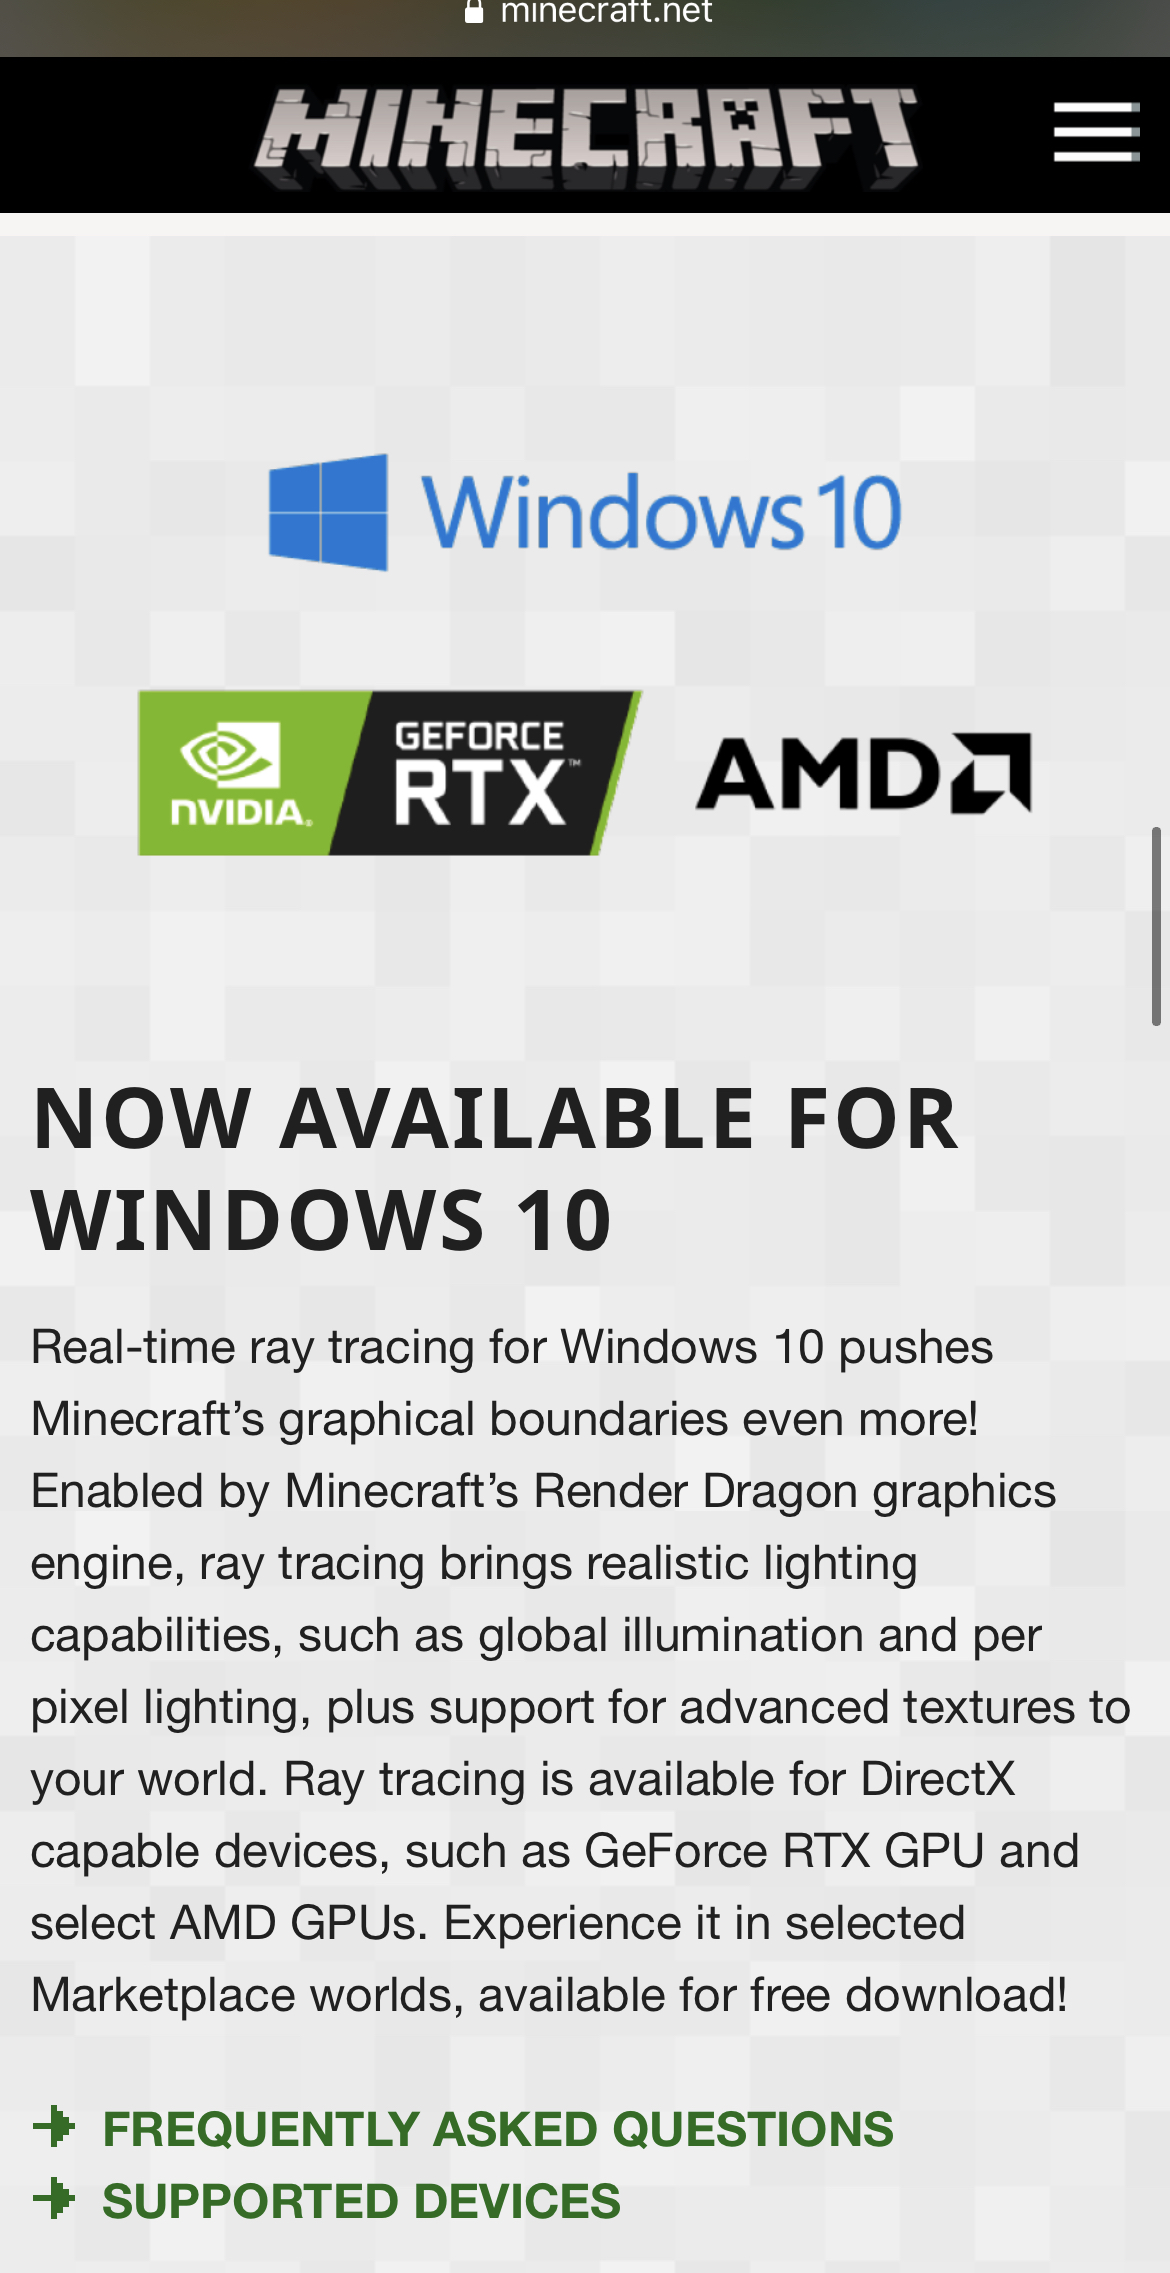 Real-time ray tracing is coming to Minecraft on Windows 10, and it